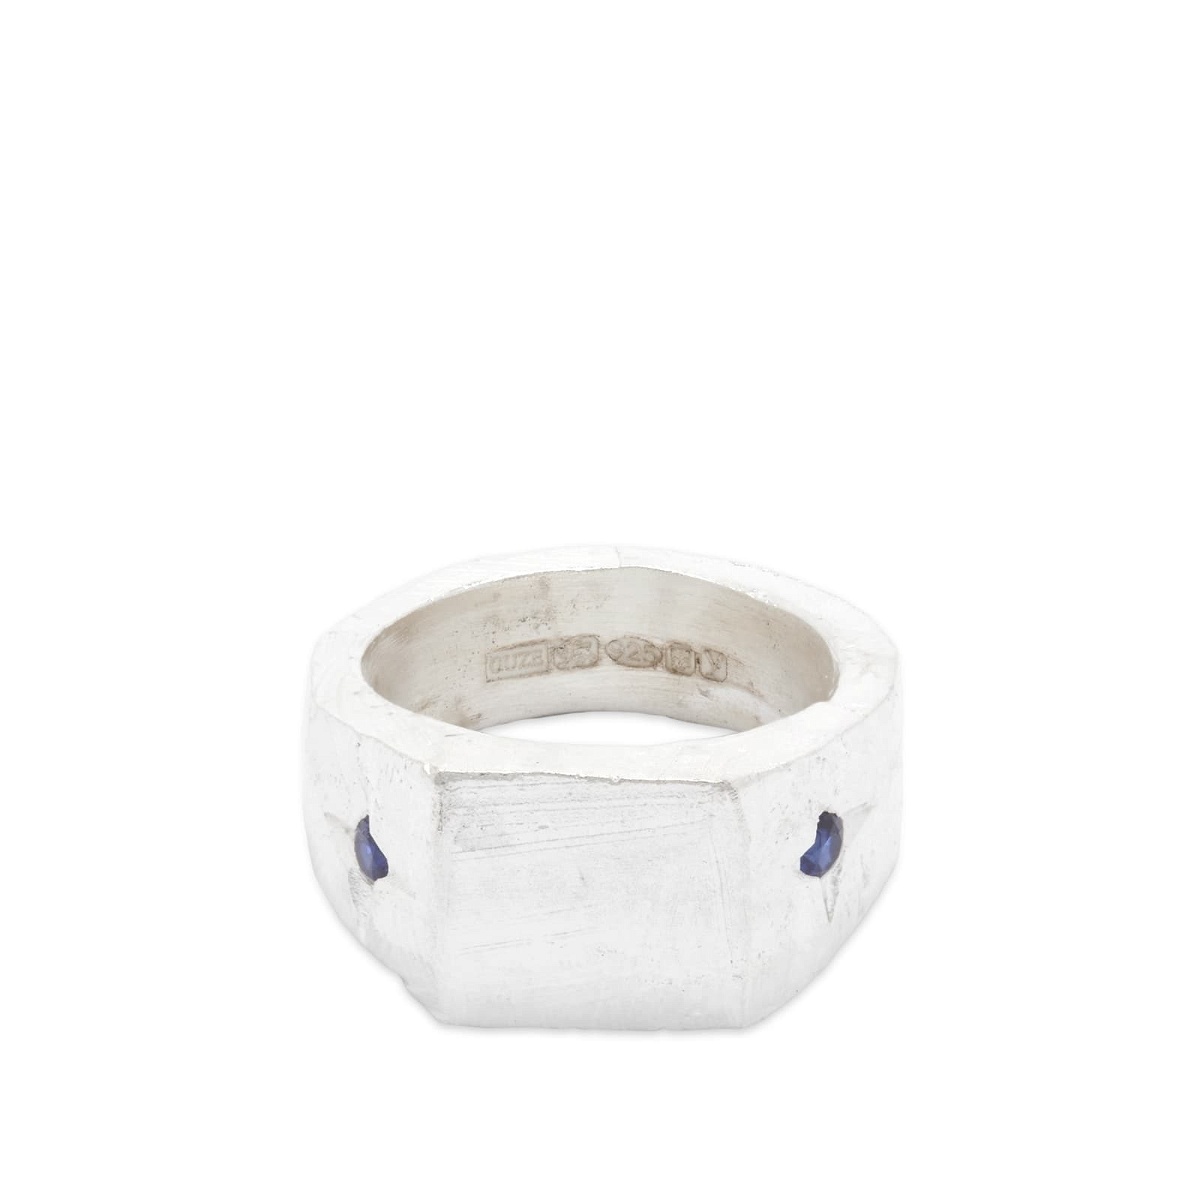 Photo: The Ouze Men's Sapphire Magnum Signet Ring in Silver